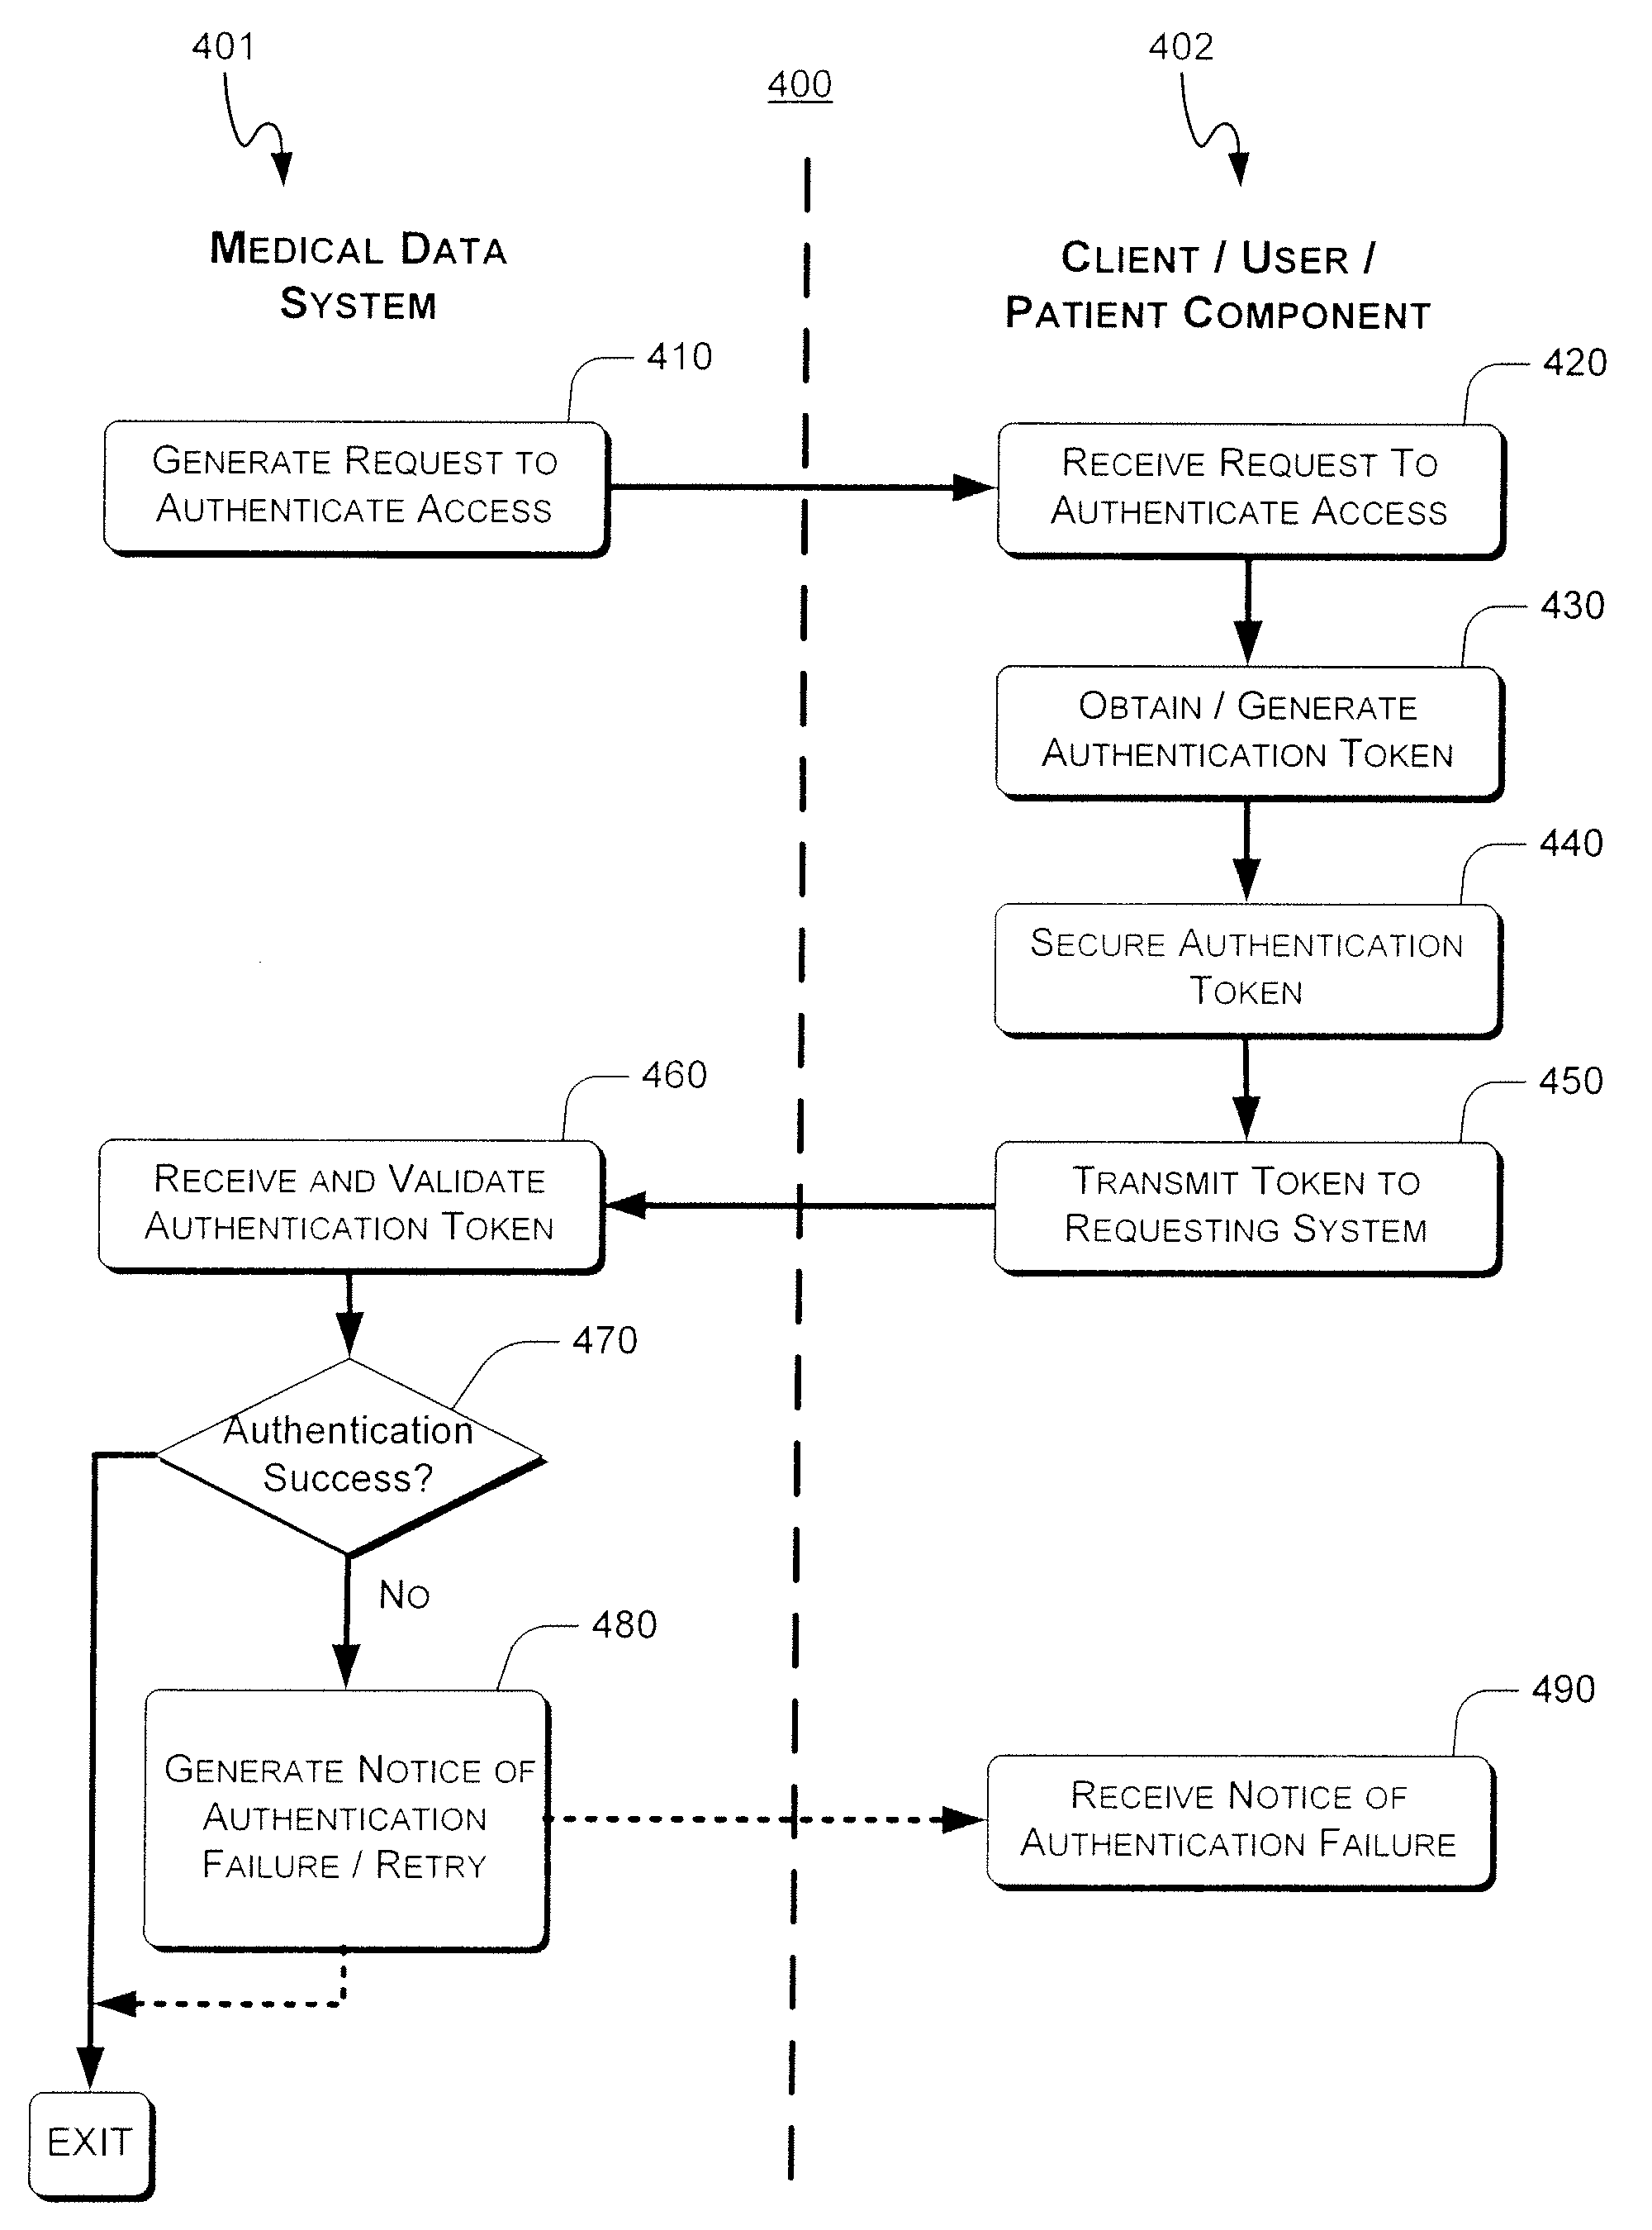 Systems and methods for remote patient monitoring